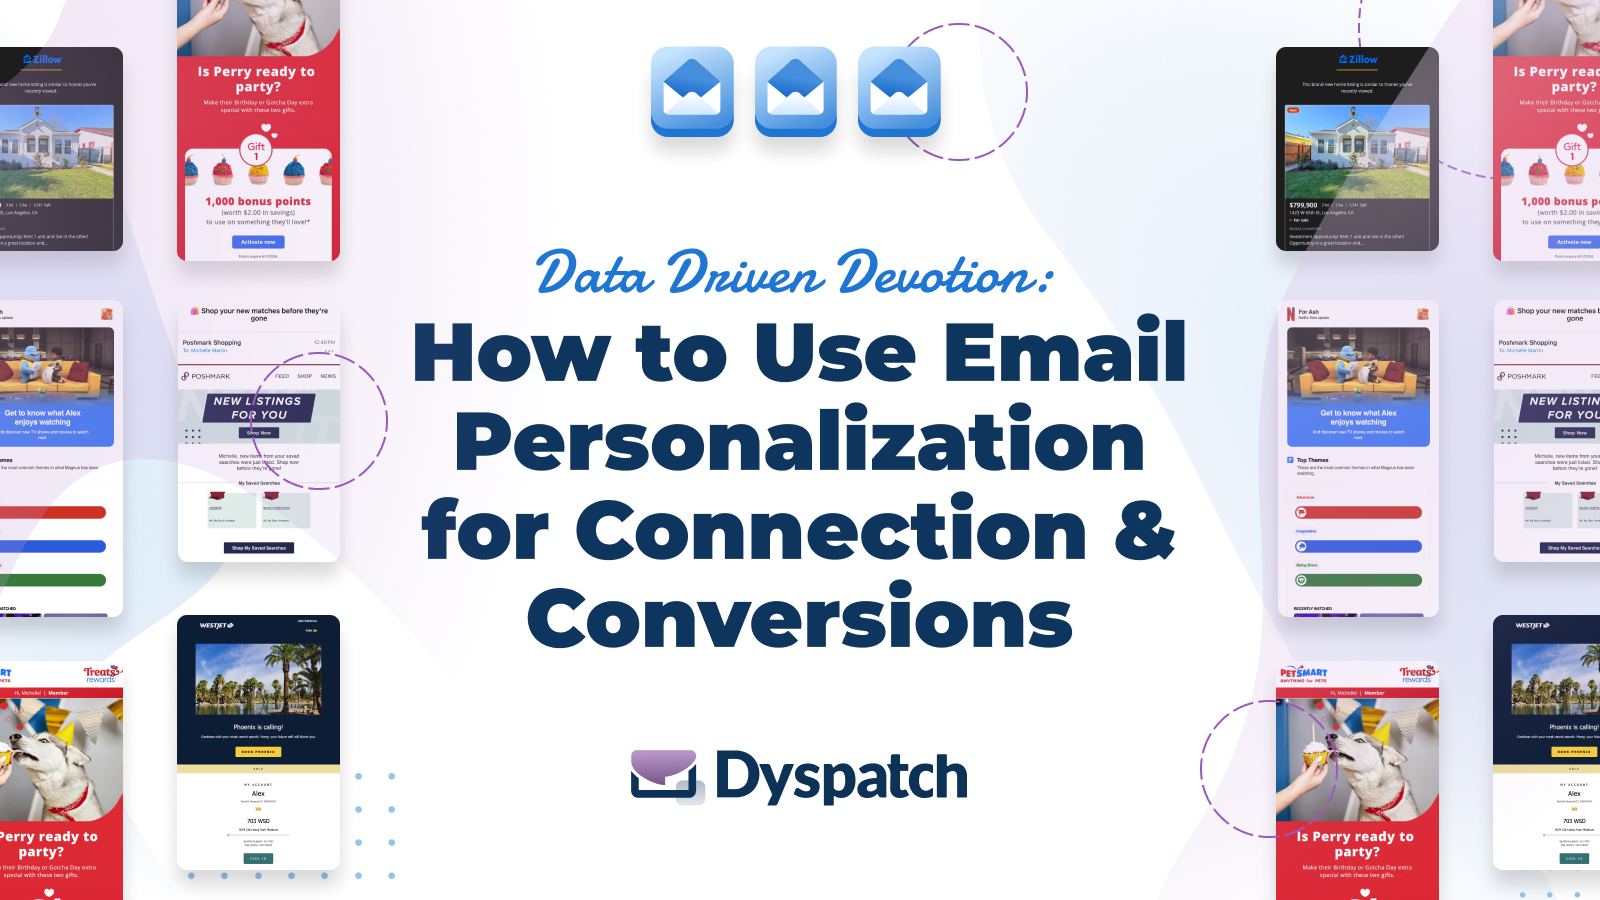 Data Driven Devotion: How to Use Email Personalization for Connection and Conversions